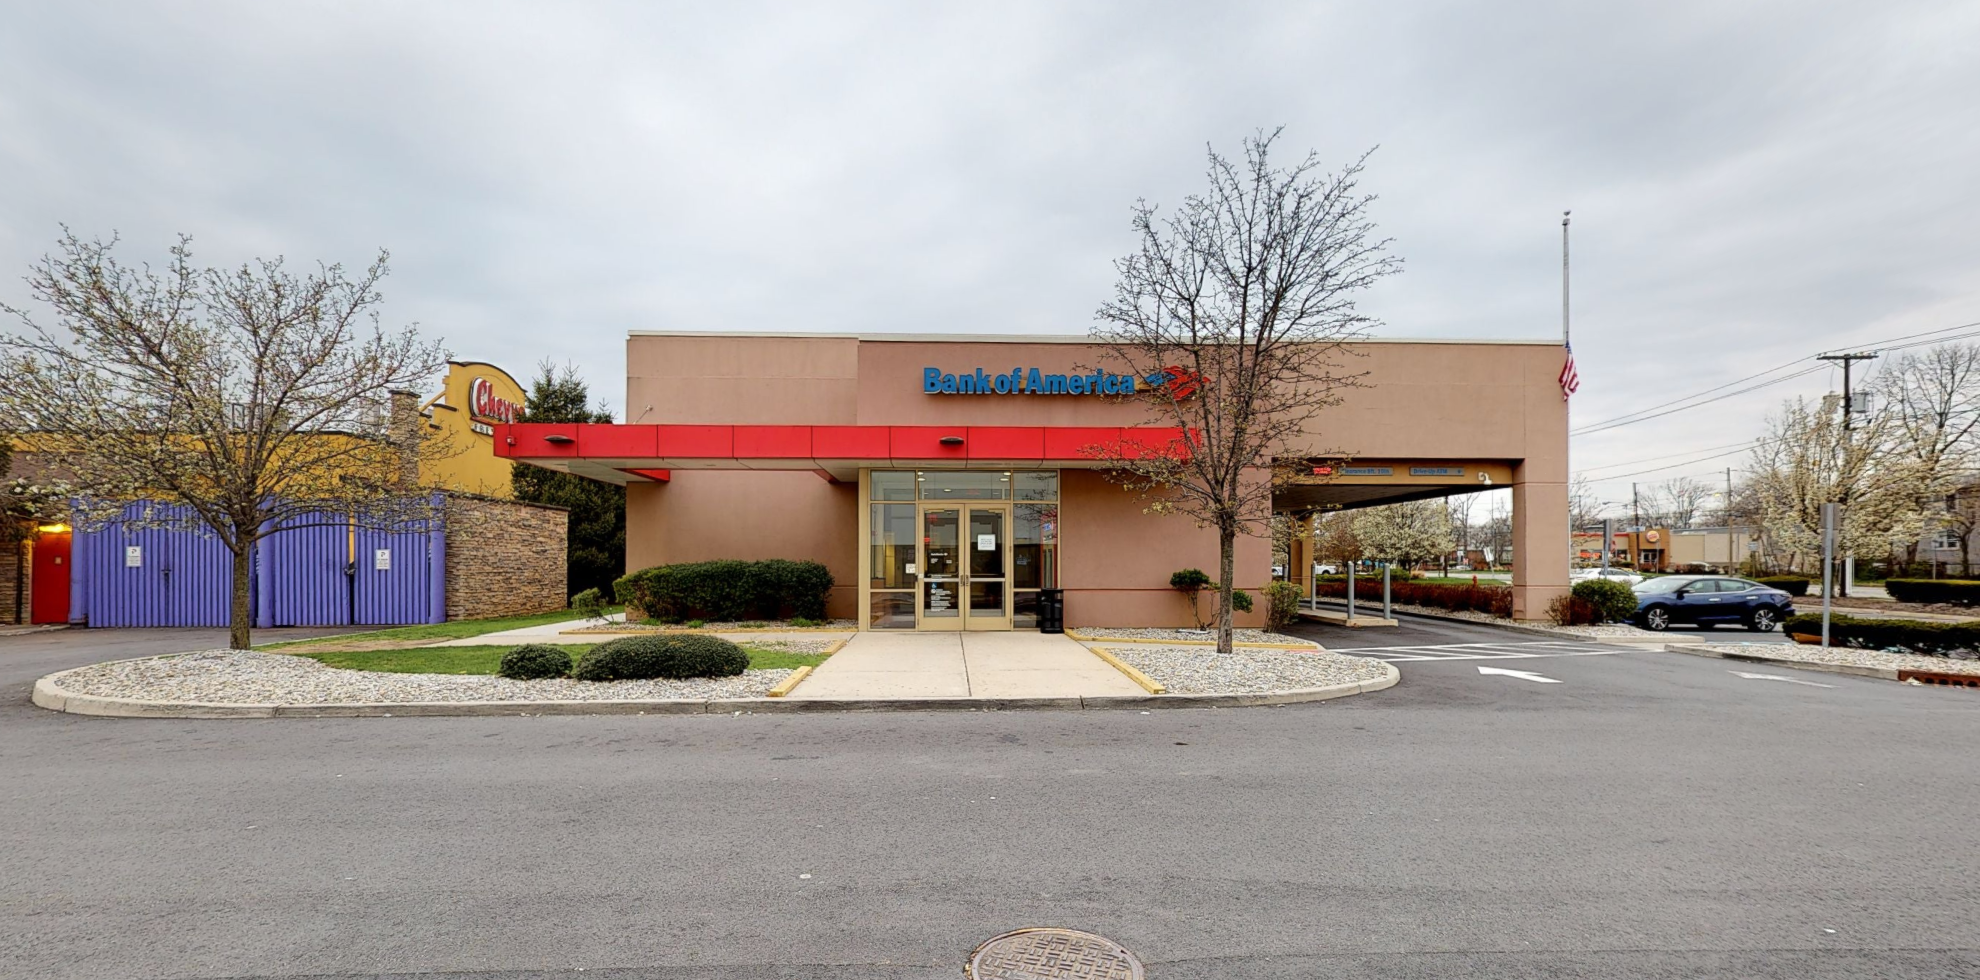 Bank of America financial center with drive-thru ATM | 1100 S Stiles St, Linden, NJ 07036